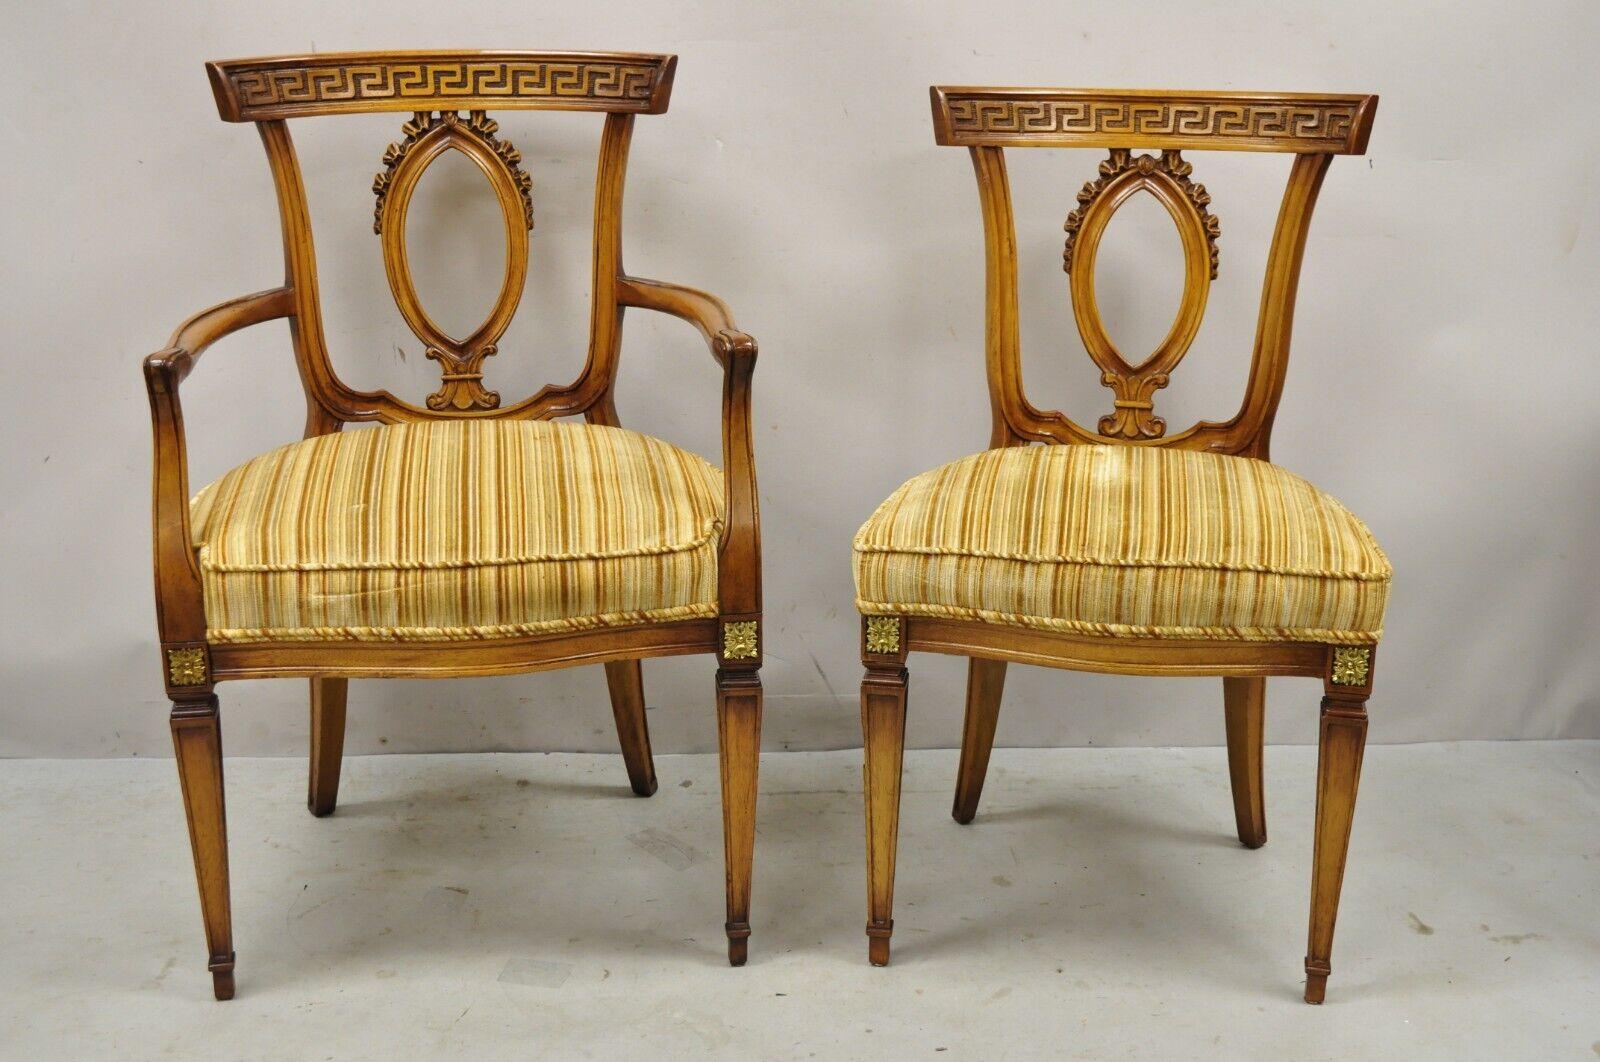 6 Vintage Italian Hollywood Regency walnut Greek Neoclassical key dining chairs. Item features (2) armchairs, (4) side chairs, carved Greek key backrests, brass ormolu to legs, solid wood frames, beautiful wood grain, nicely carved details, tapered